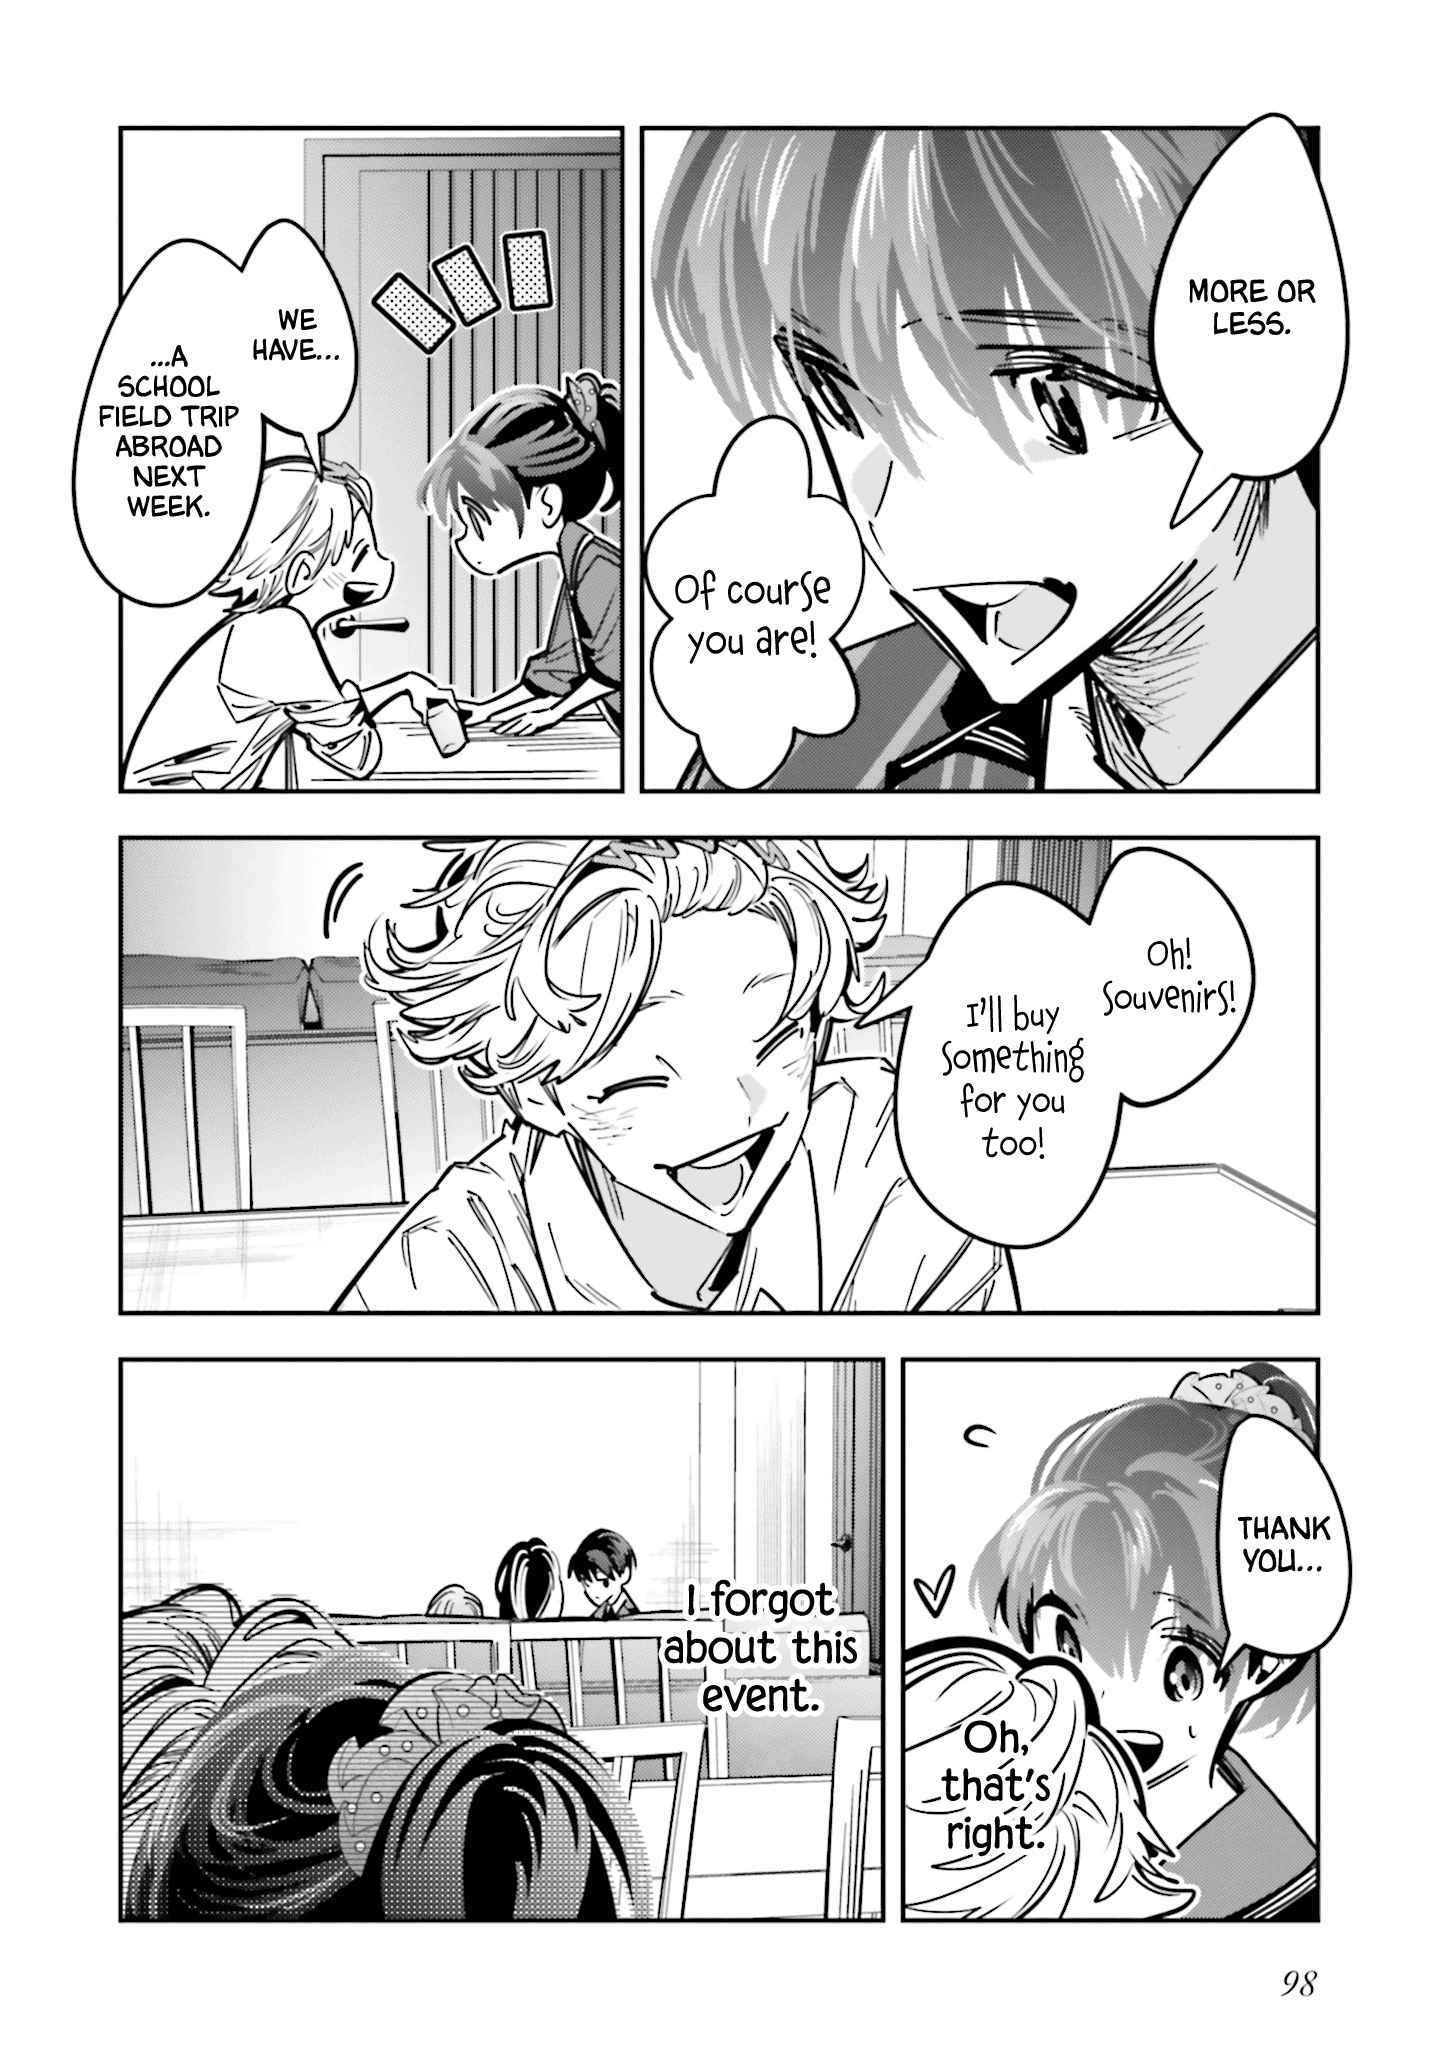 I Reincarnated As The Little Sister Of A Death Game Manga’S Murd3R Mastermind And Failed - Page 2